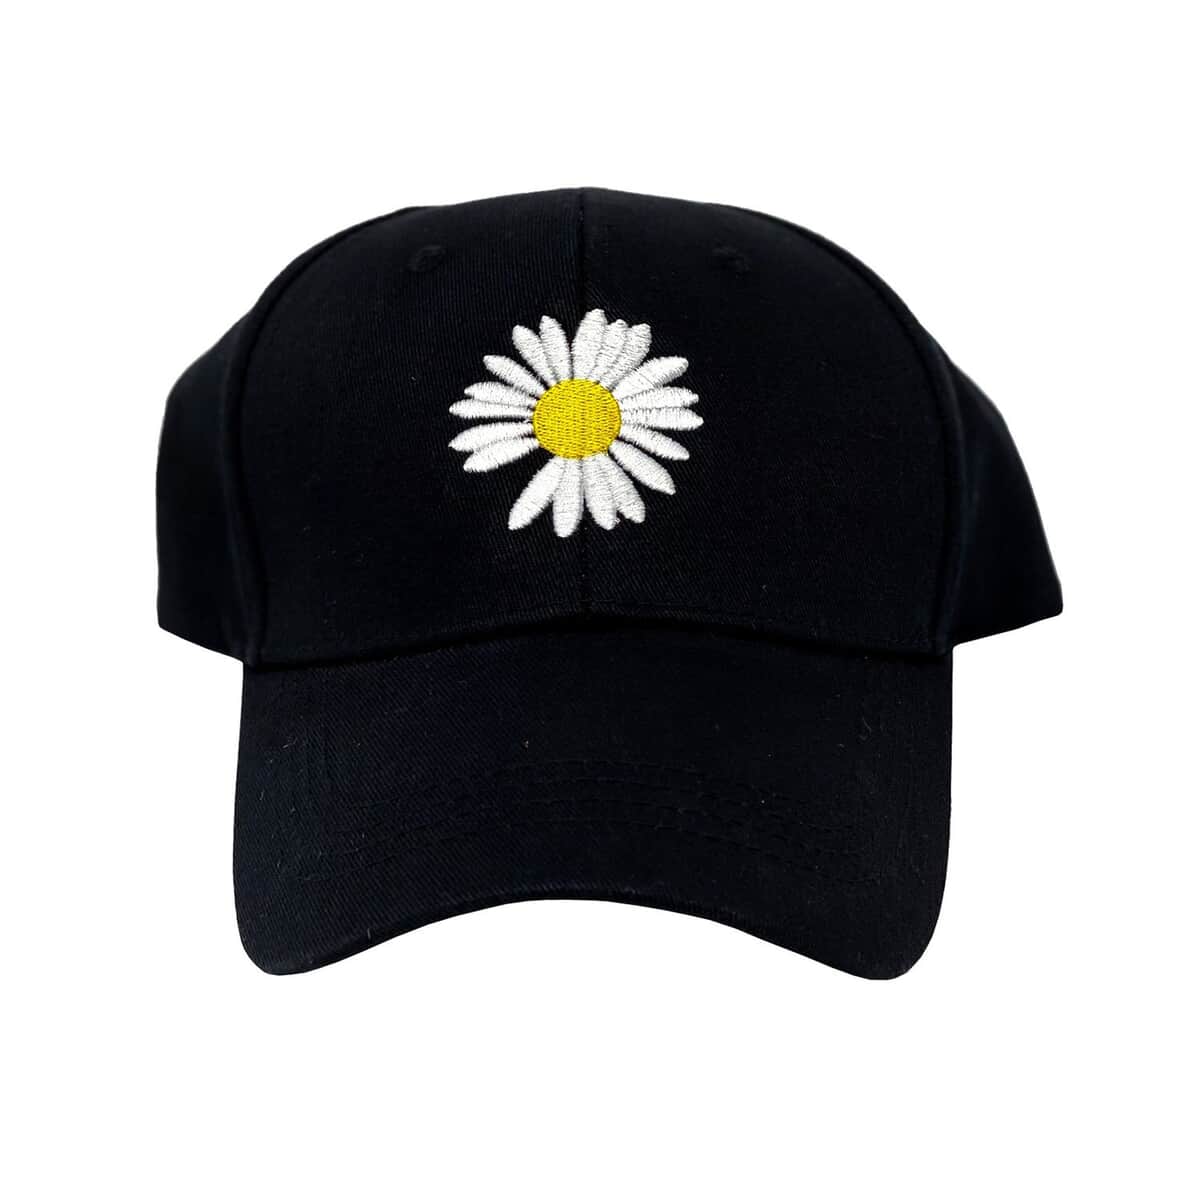 Flower Embroidered Baseball Cap - White/Yellow Flower image number 1